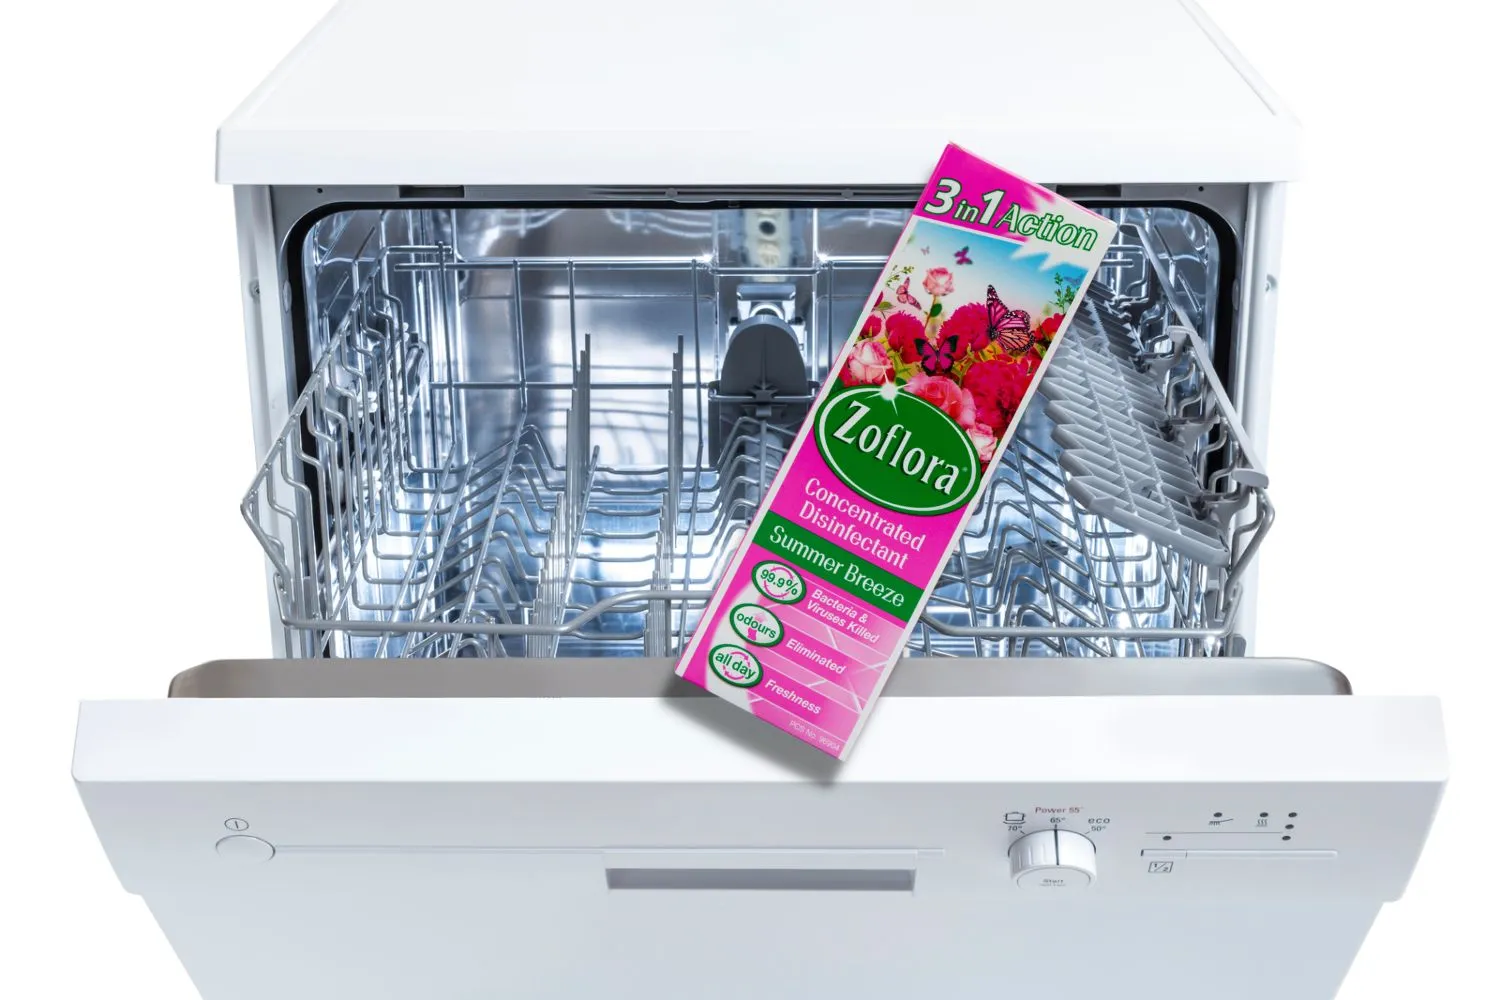 How to Use Zoflora to Clean Your Dishwasher